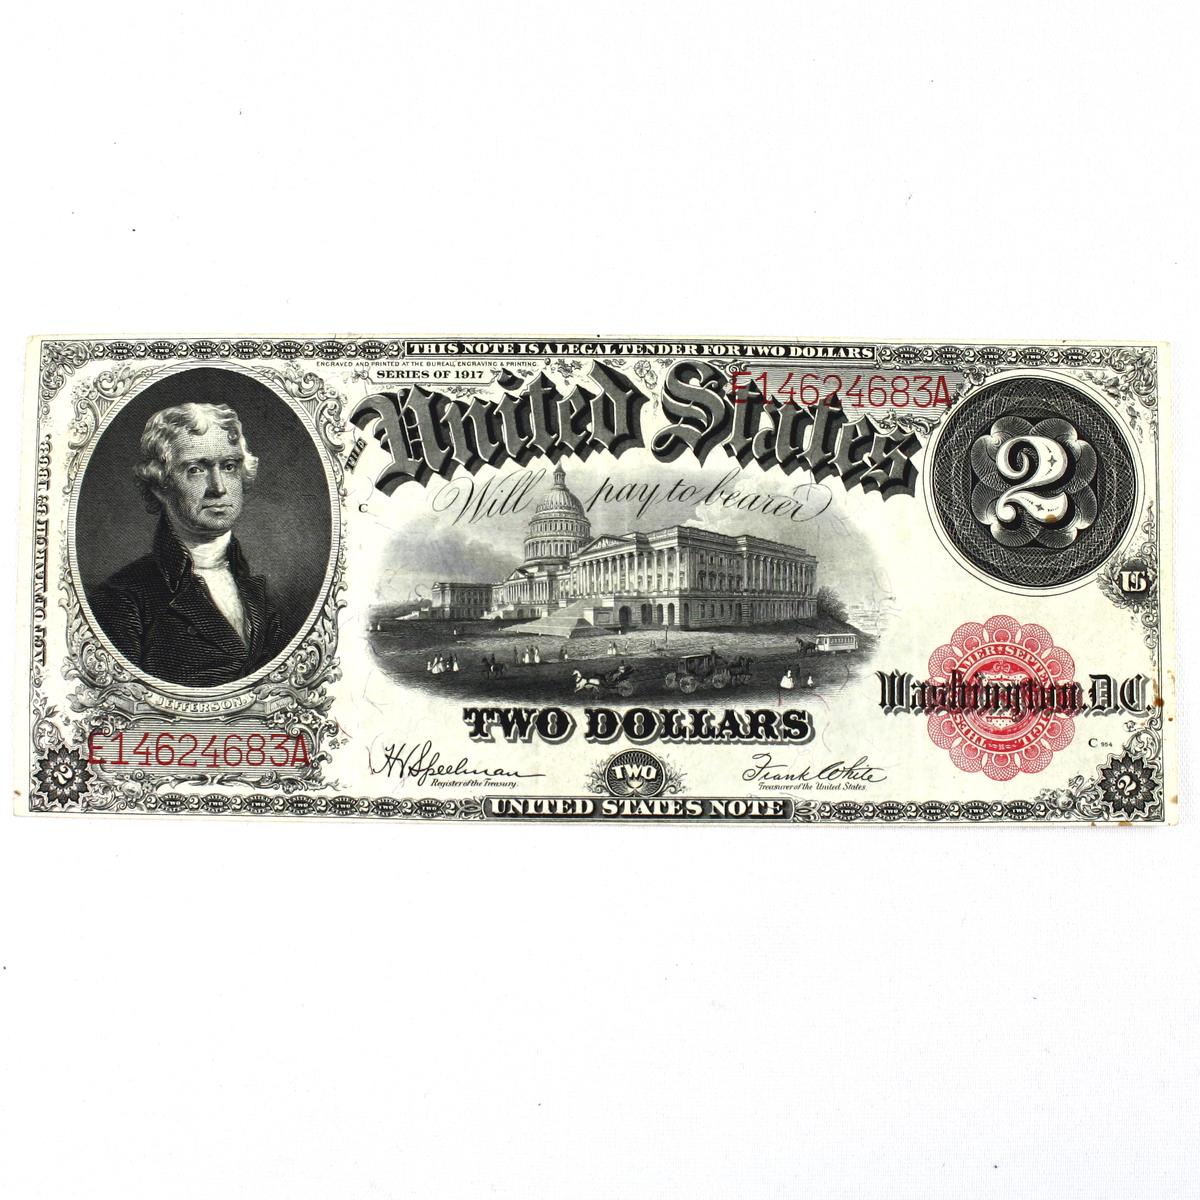 1917 U.S. $2 large size red seal legal tender banknote